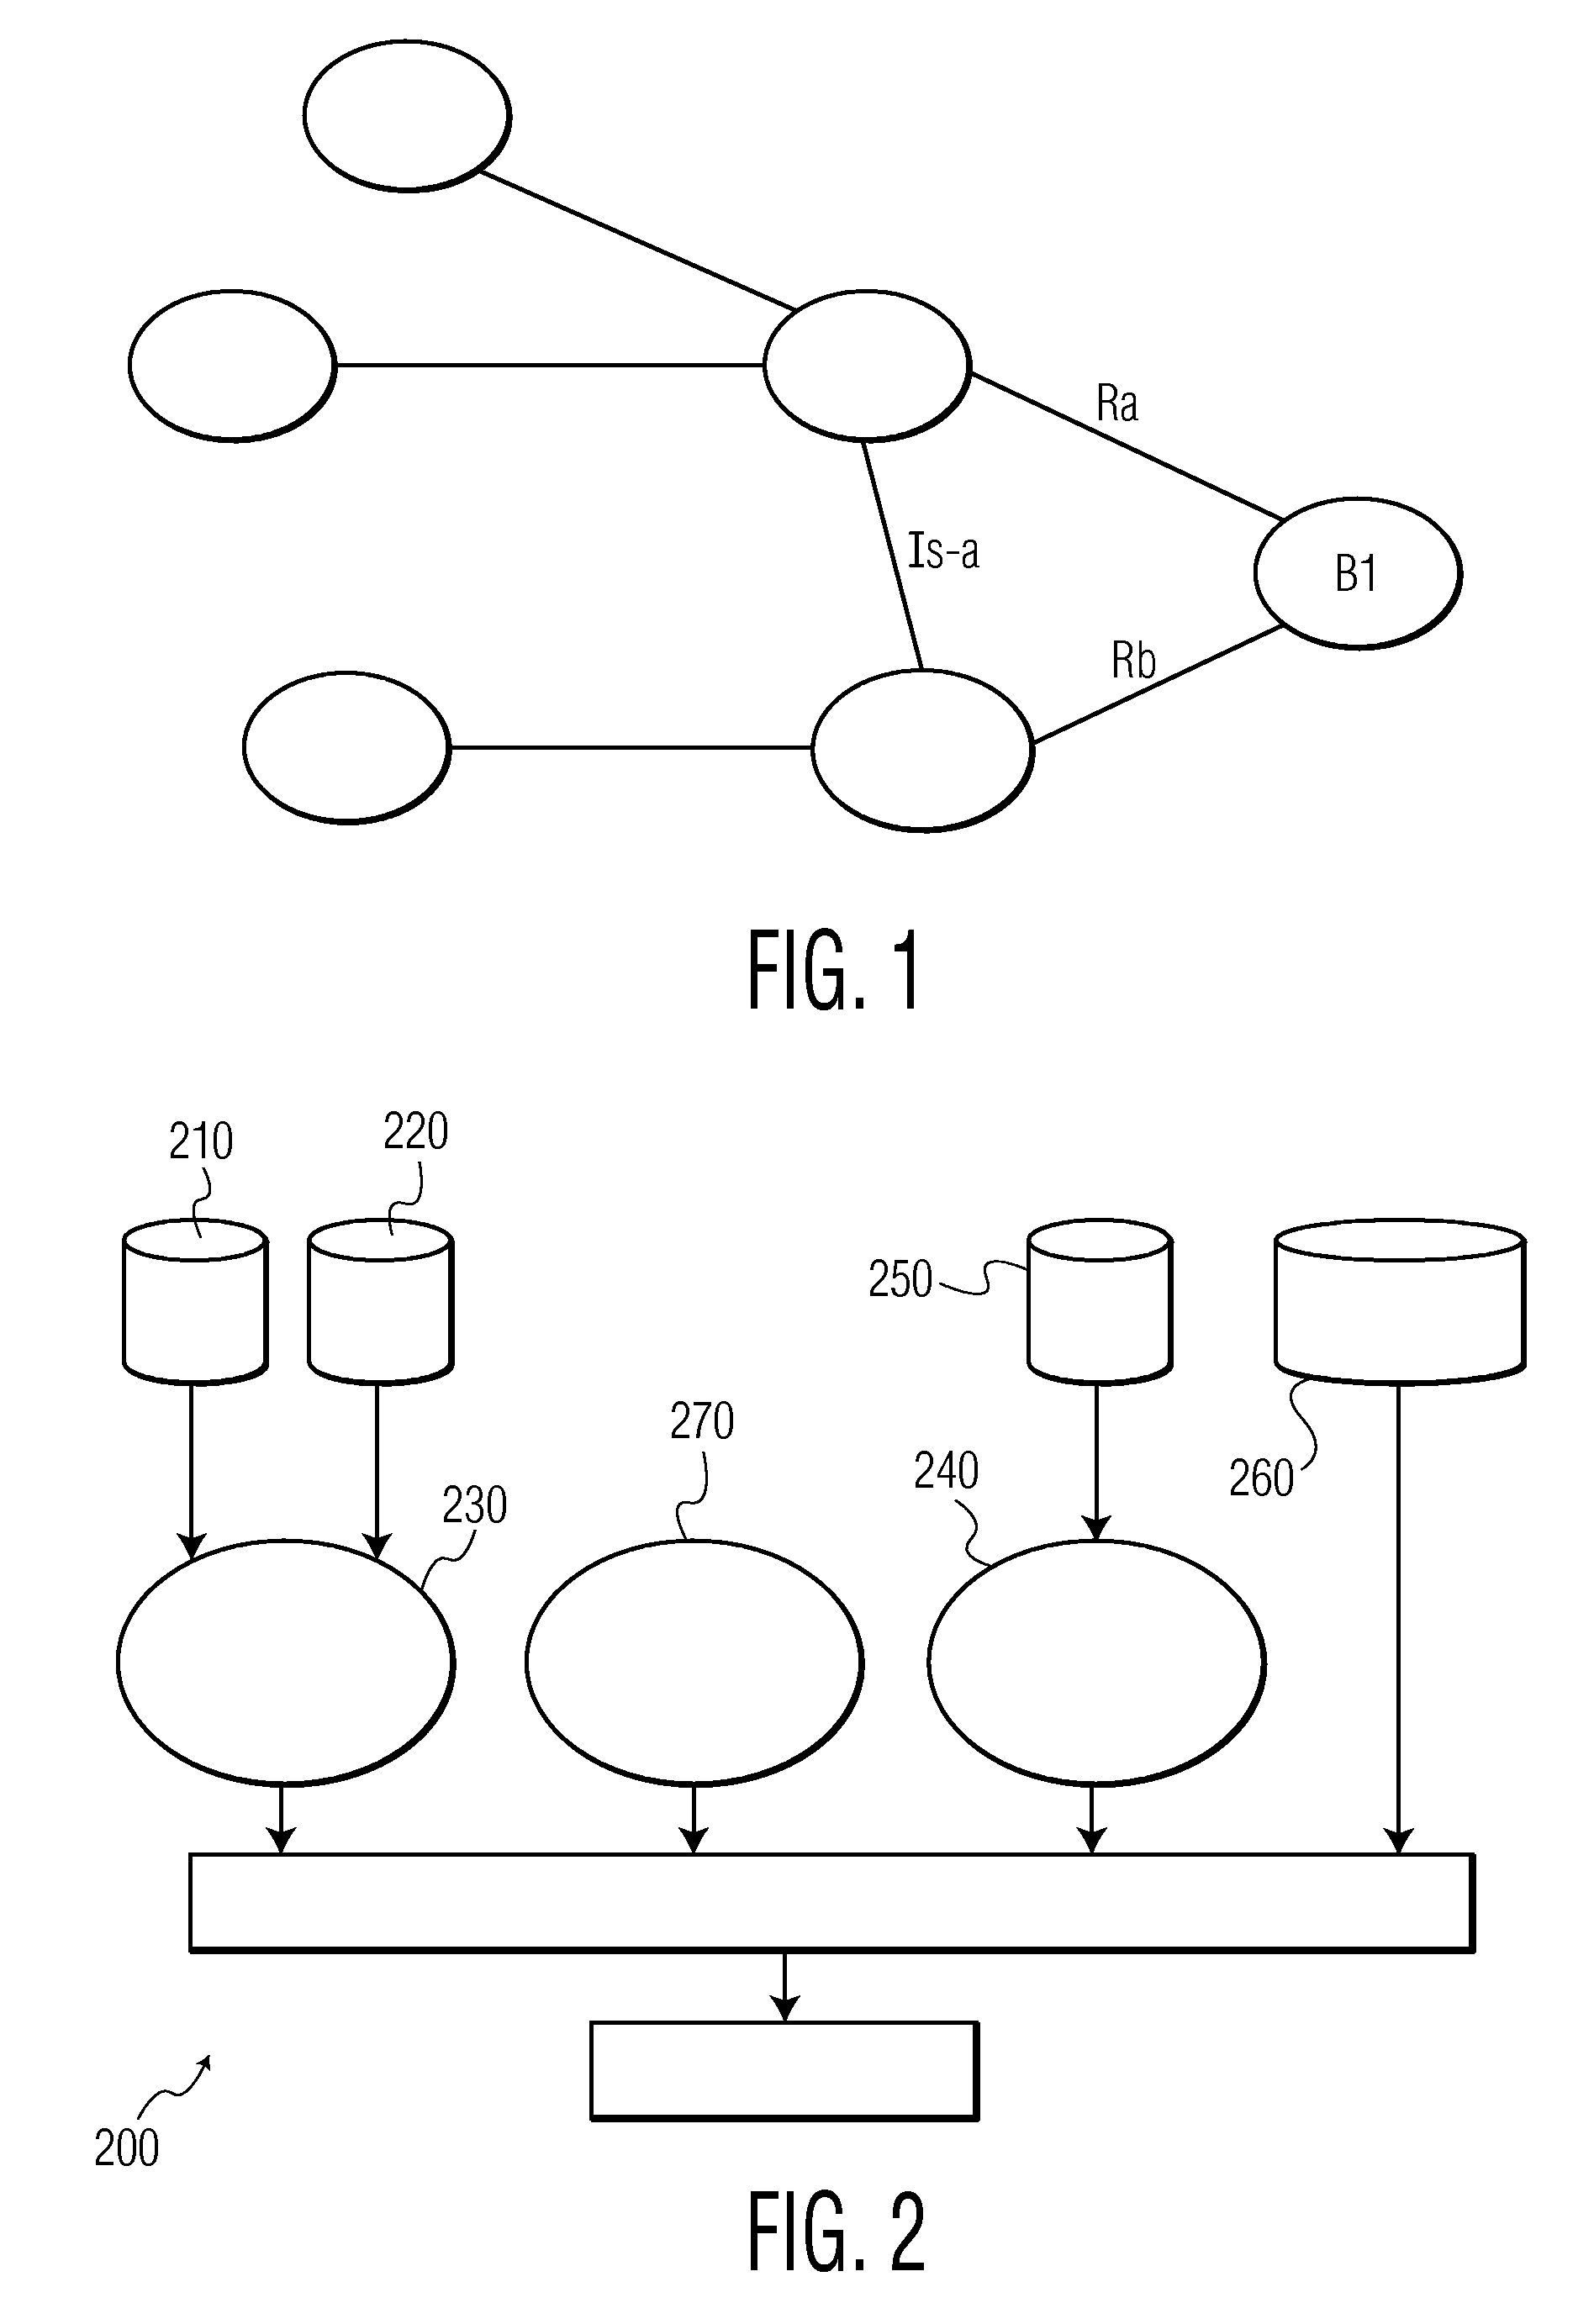 System and Method for Collecting Evidence Pertaining to Relationships Between Biomolecules and Diseases